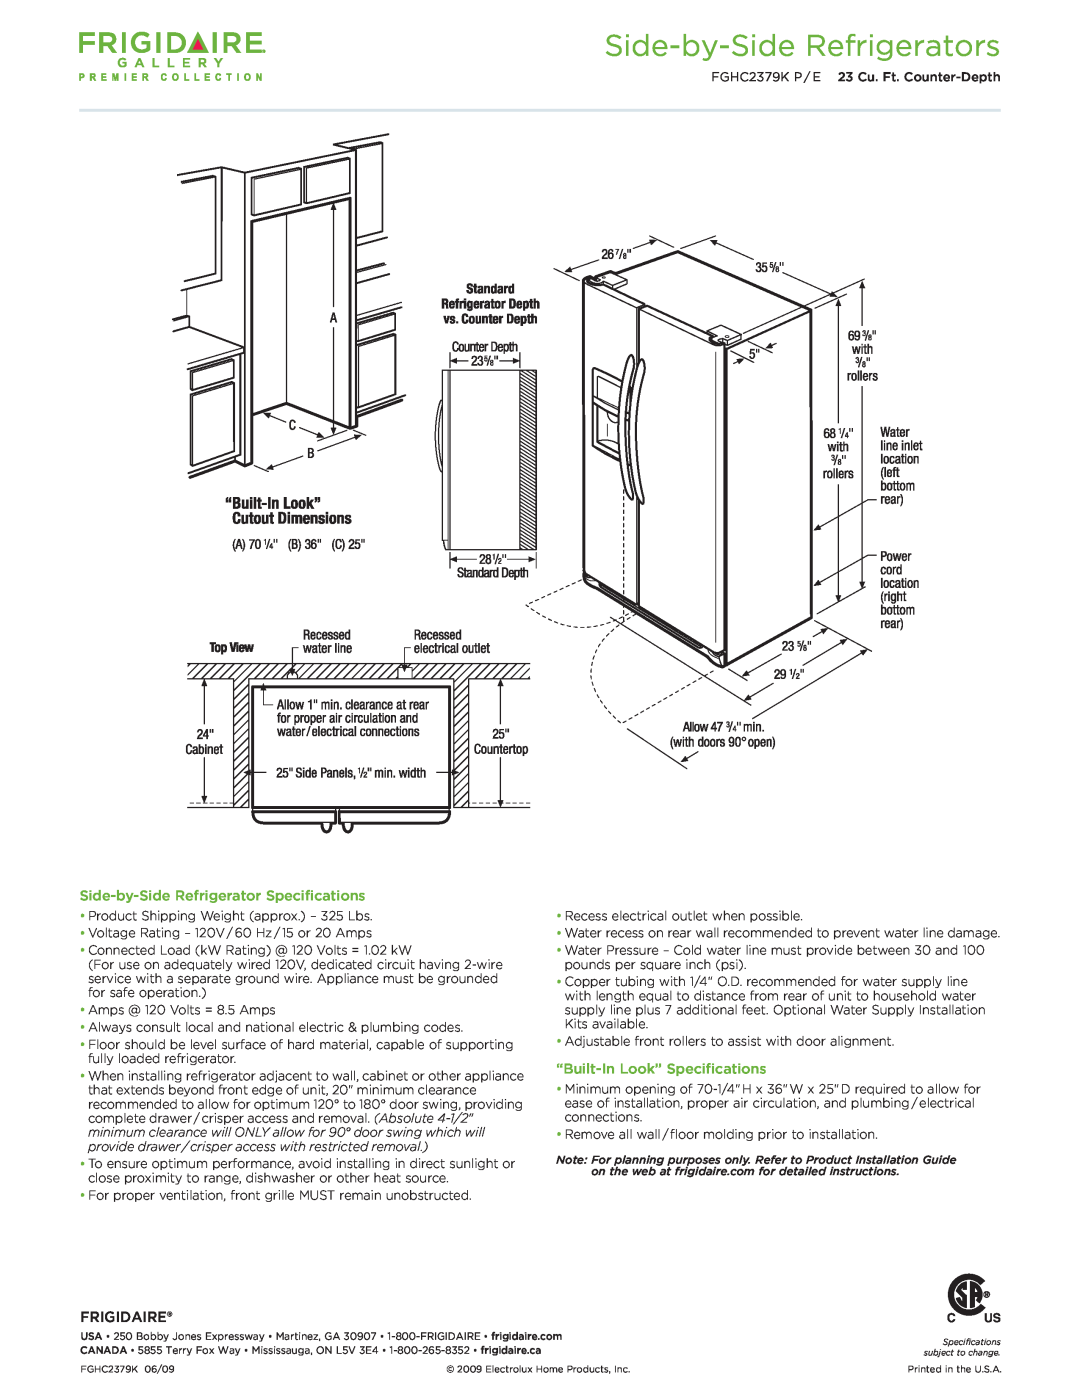 Frigidaire FGHC2379KP, FGHC2379KE Side-by-SideRefrigerator Specifications, “Built-InLook” Specifications, Frigidaire 